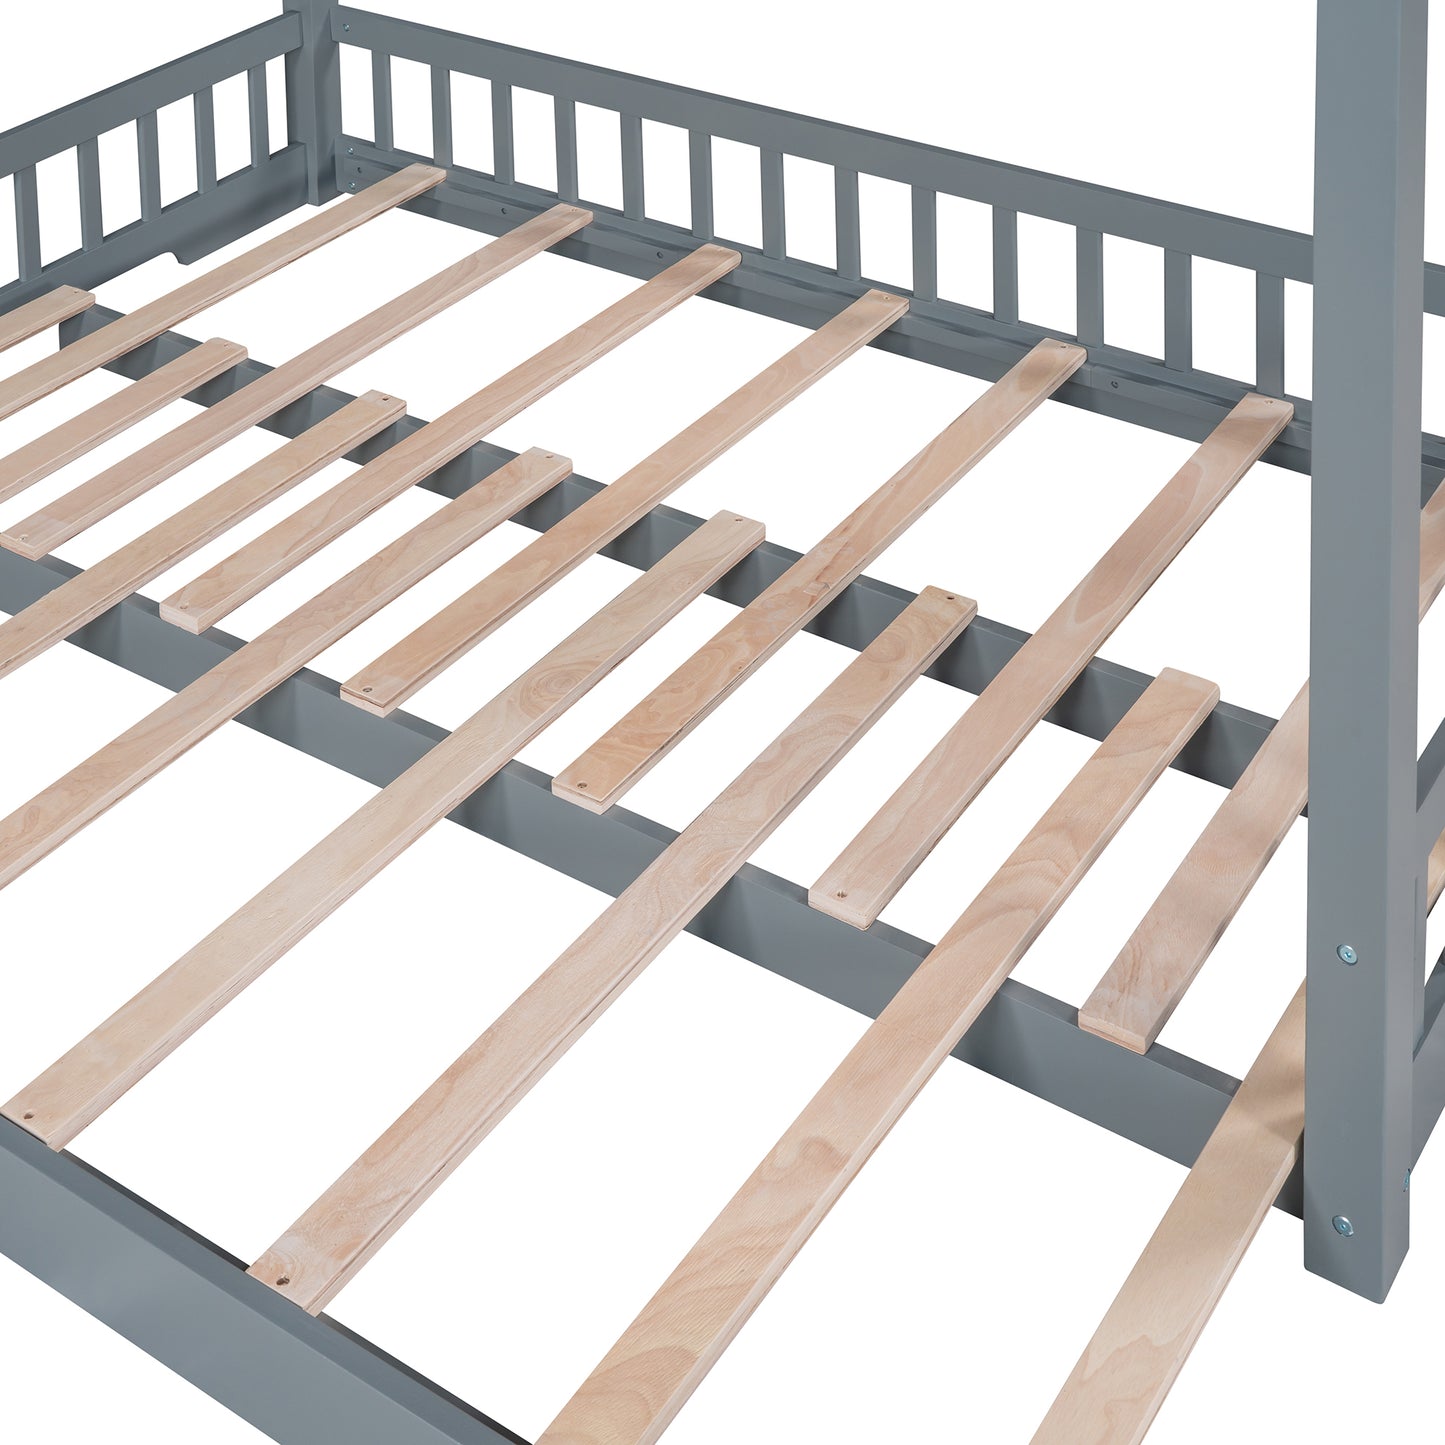 Extending House Bed, Wooden Daybed, Gray